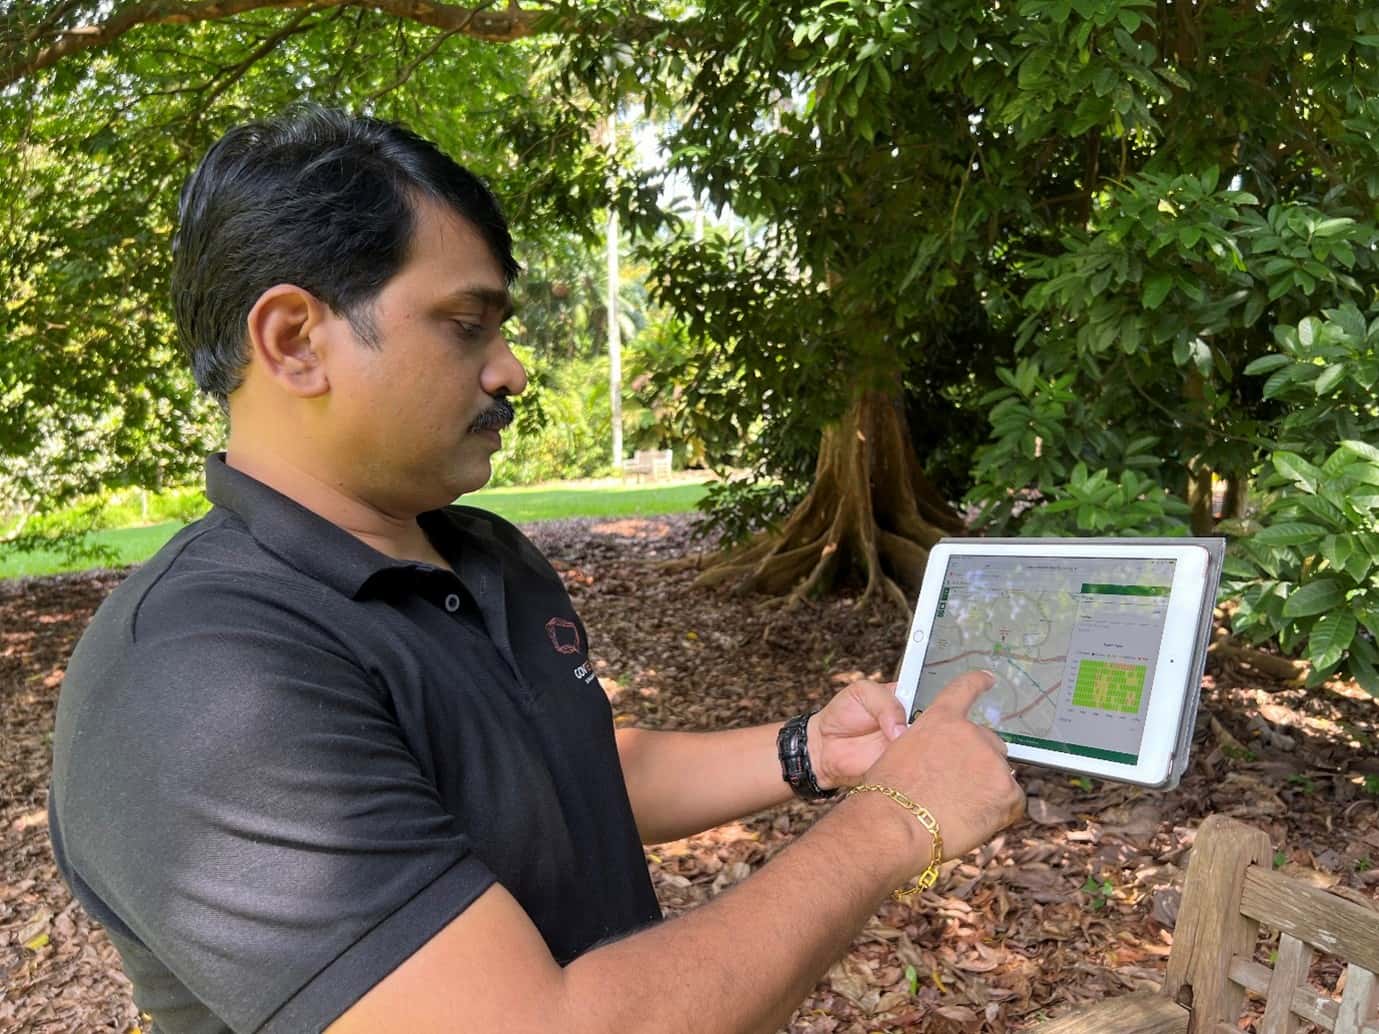 Due to high footfall, NParks collaborated with GovTech to develop a map-based public portal